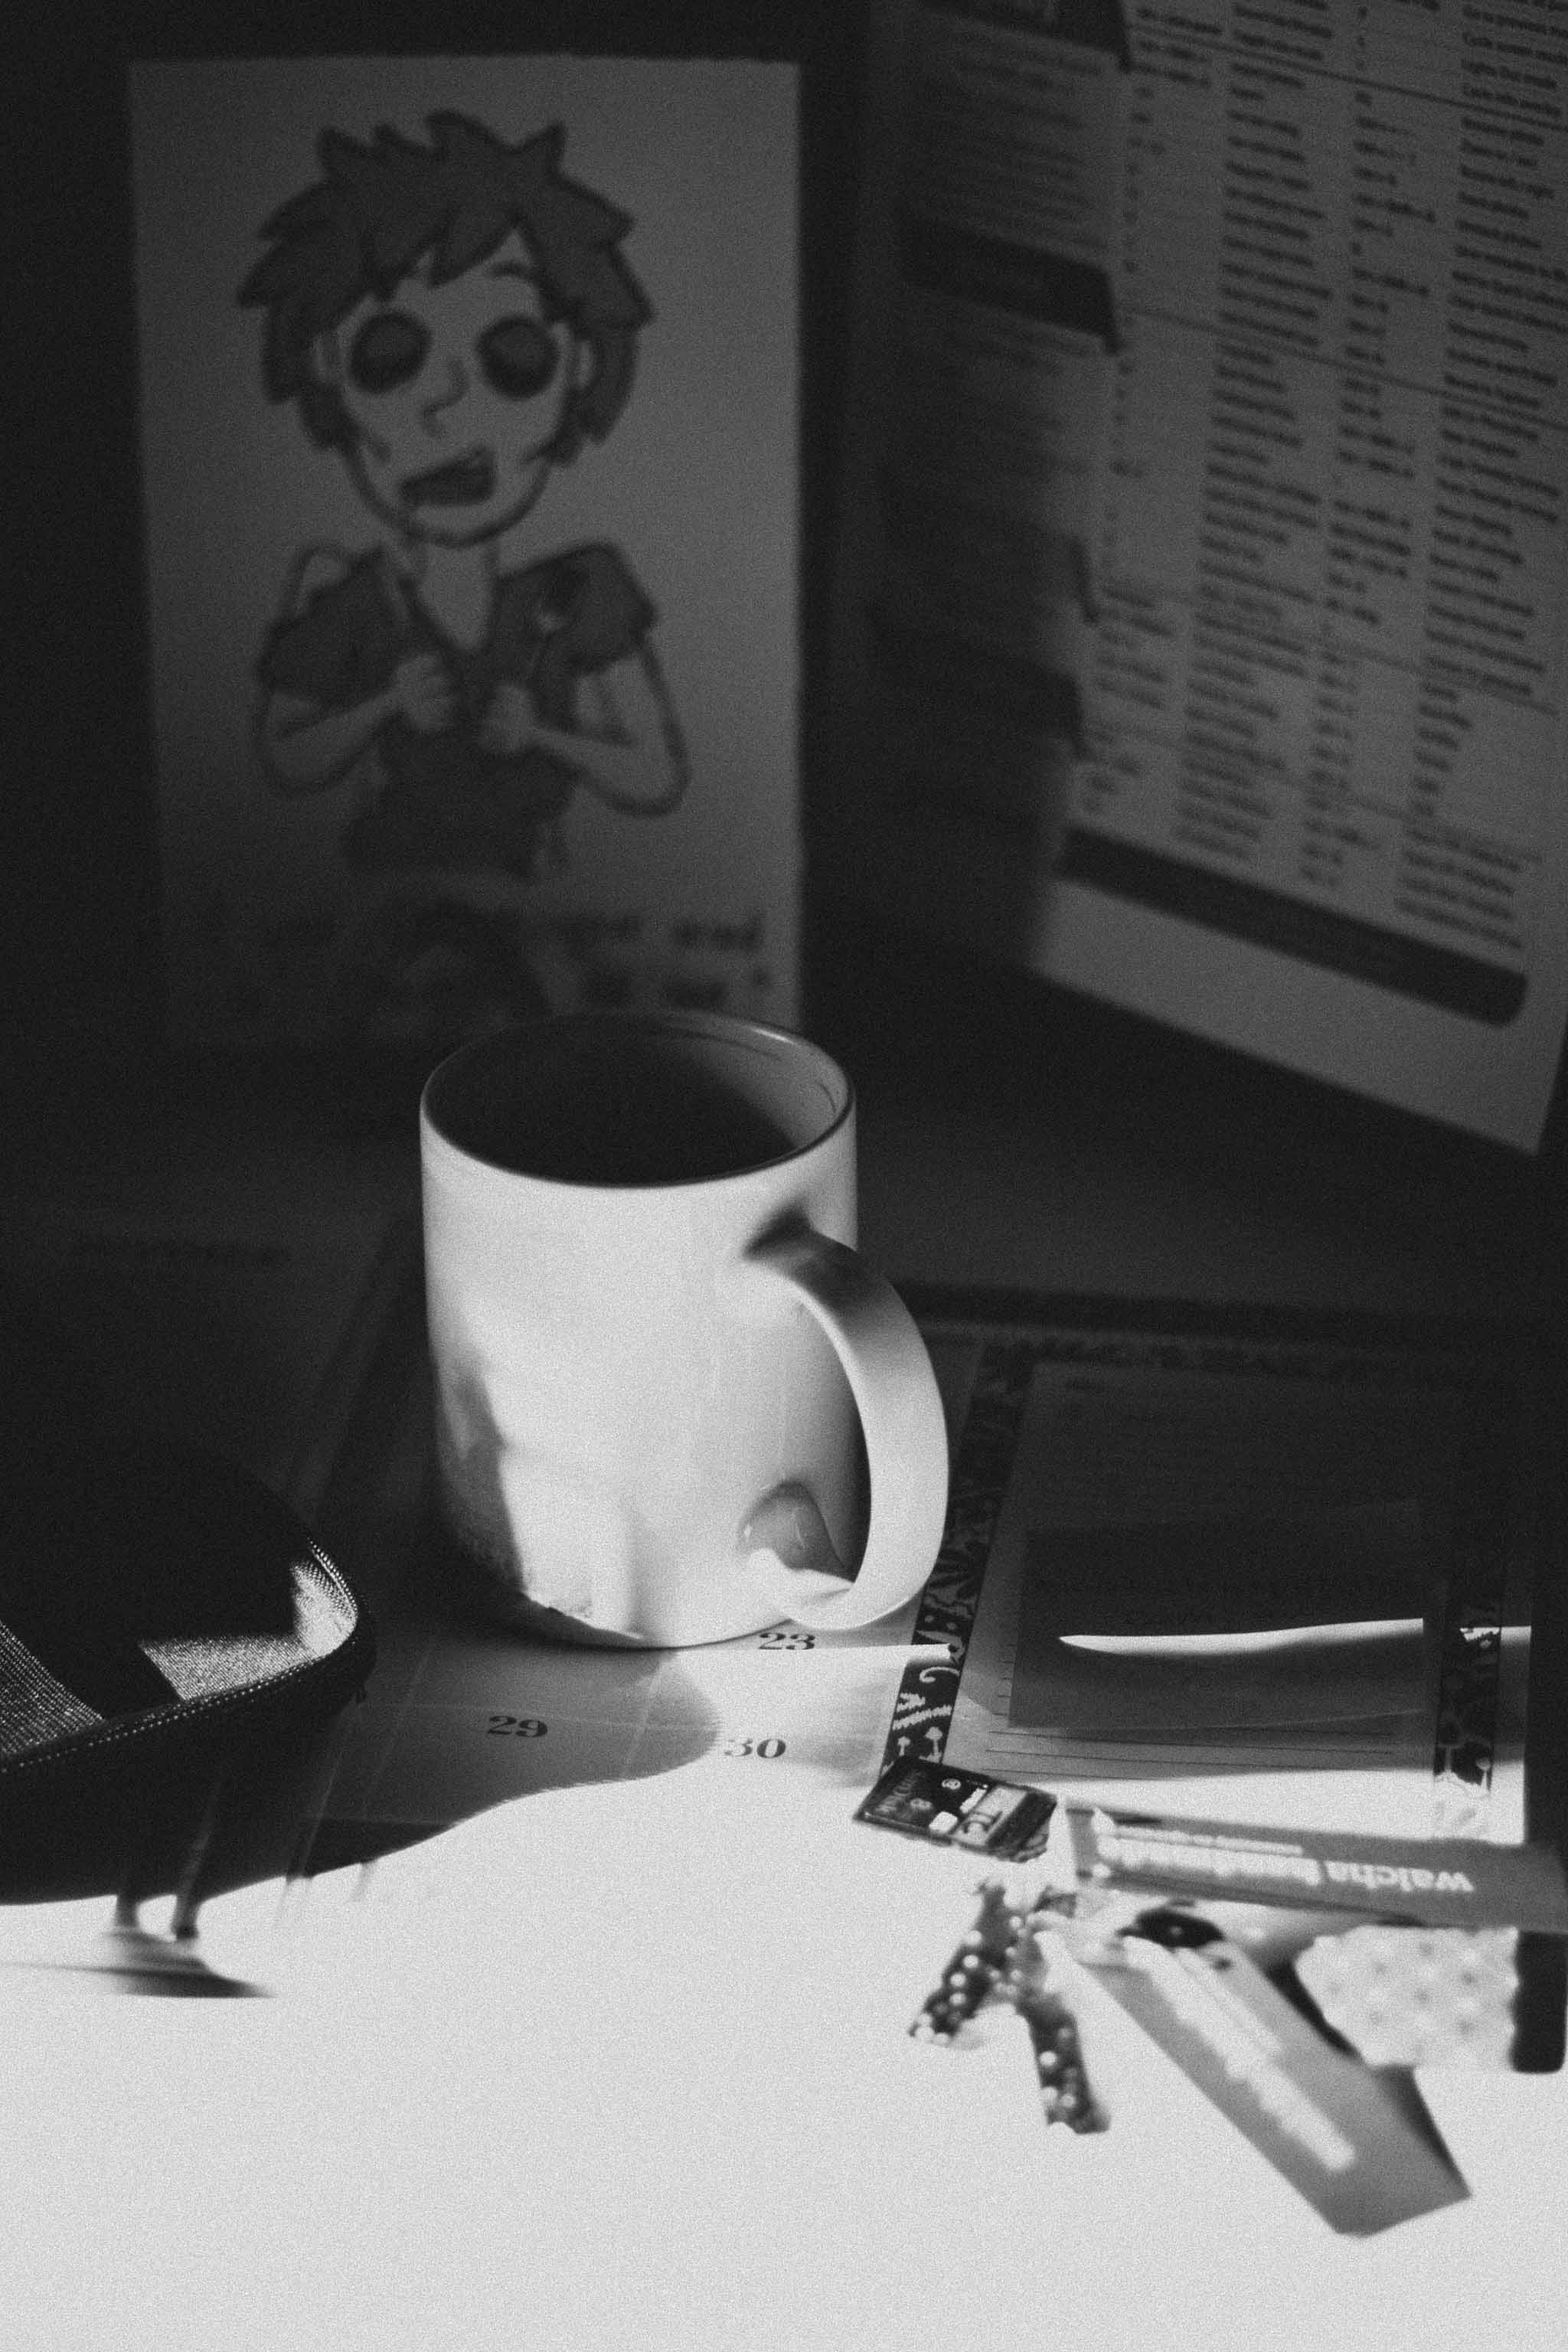 Coffee and morning chaos - there's so much to do on the to-do list... remember to breathe and if it doesn't get done, it will still be there tomorrow.